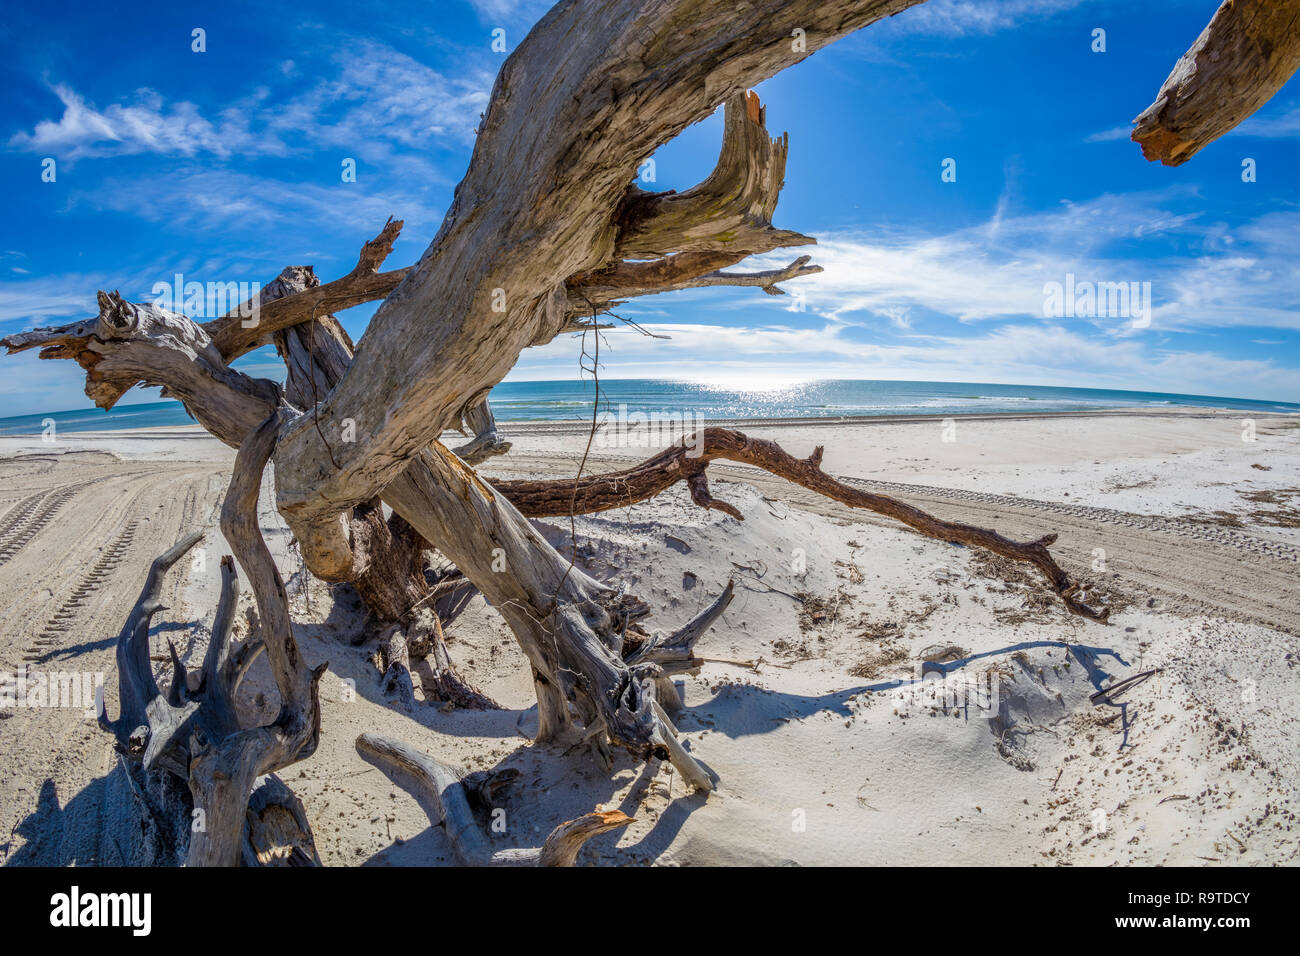 driftwood on Gulf of Mexico beach on St George Island in the panhandle or forgotten coast area of Florida in the United States Stock Photo